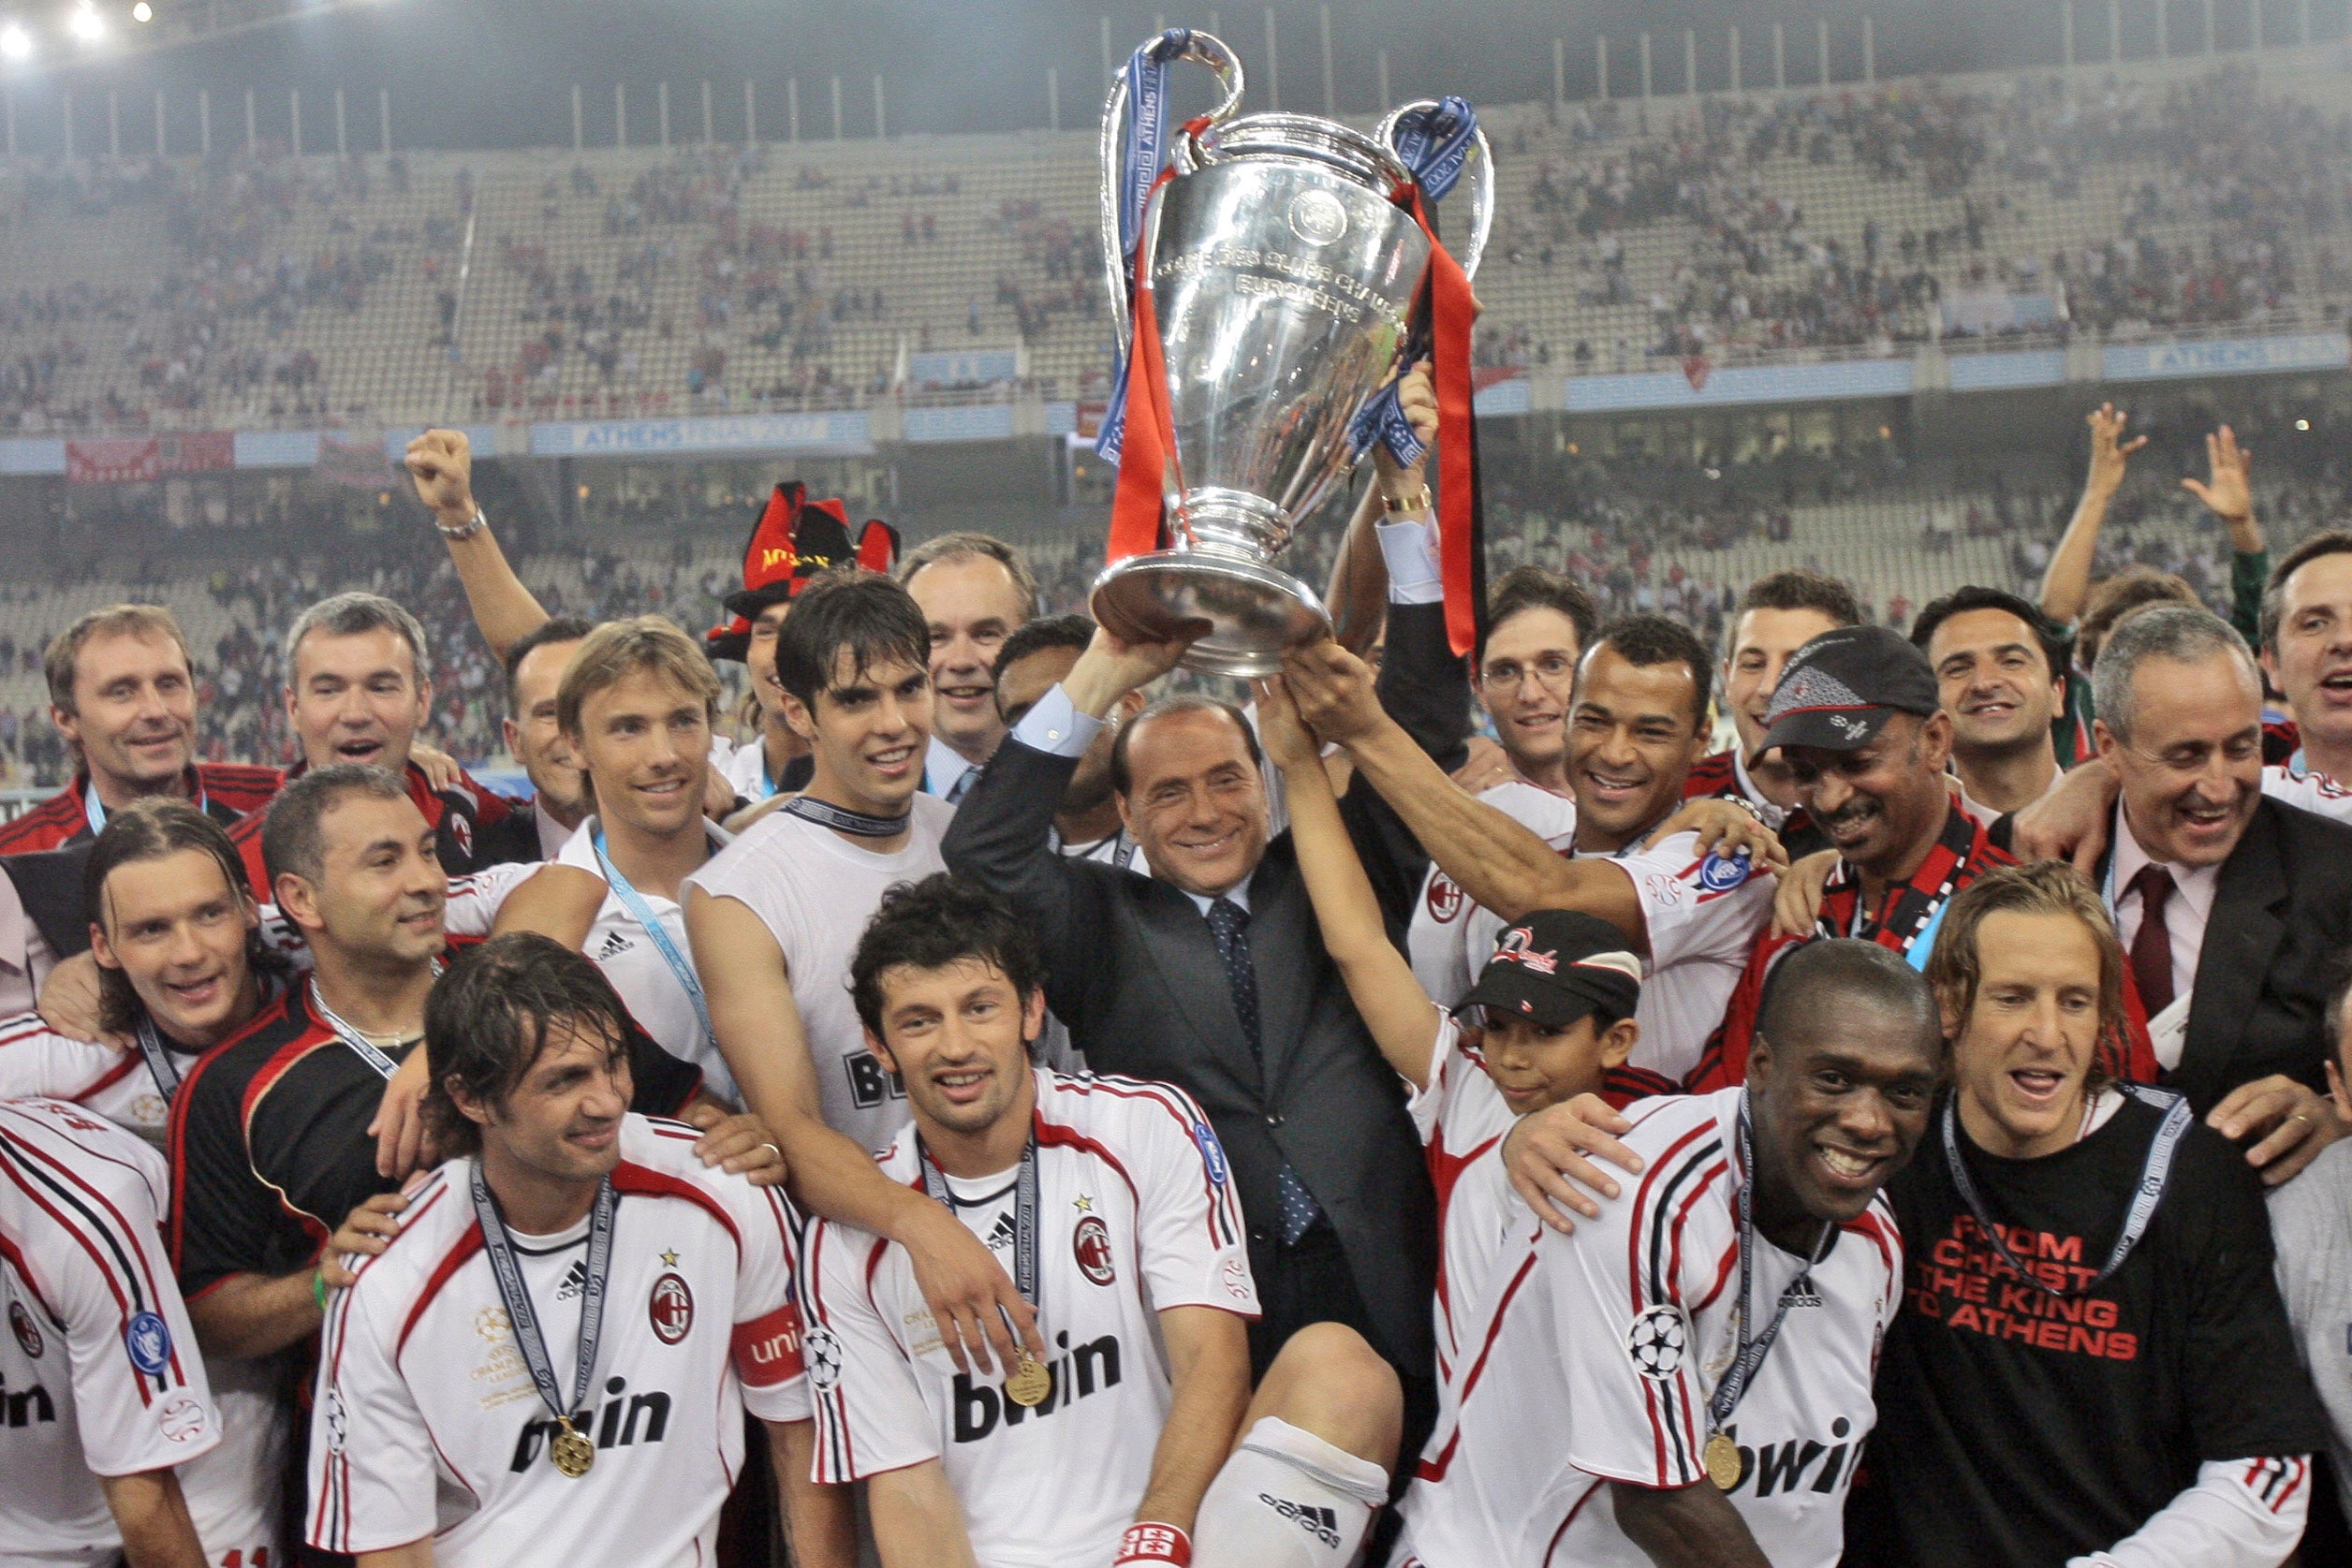 Berlusconi raises the Champions League trophy aloft alongside AC Milan players after they beat Liverpool 2-1 in the 2007 final